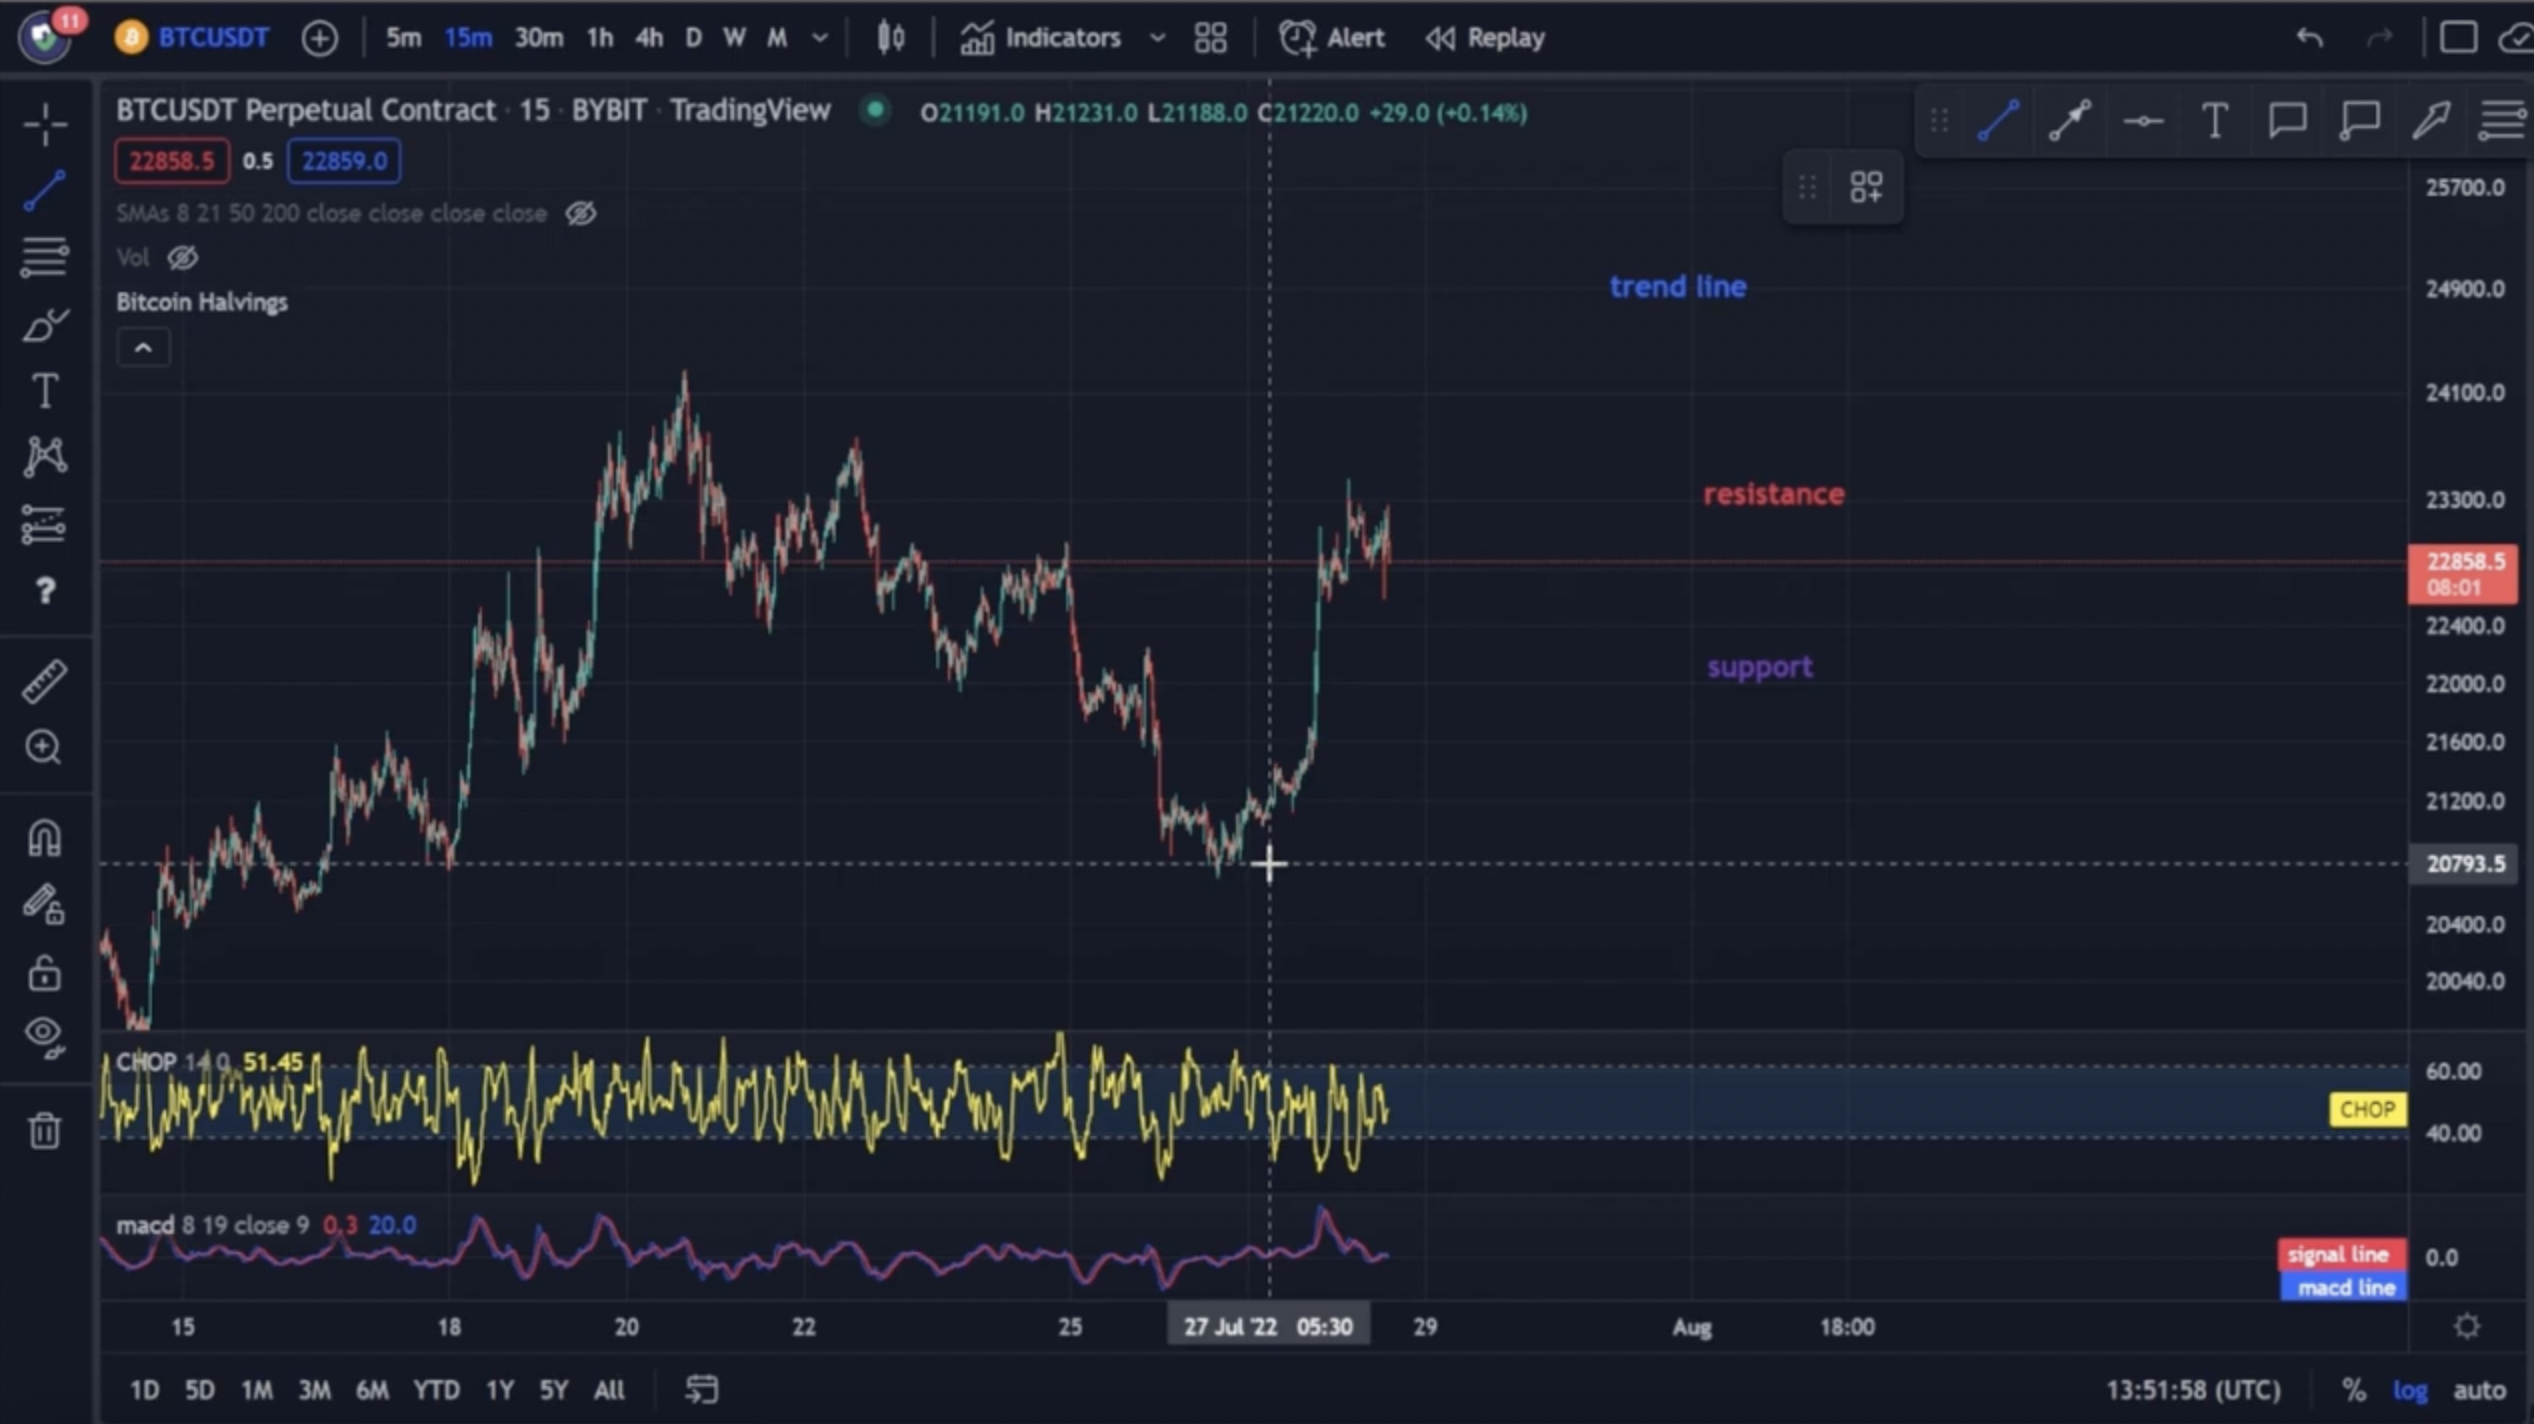 Hello everyone, let's take a look at the BTC to USDT chart on a 15 minute time frame on 29.07.2022.